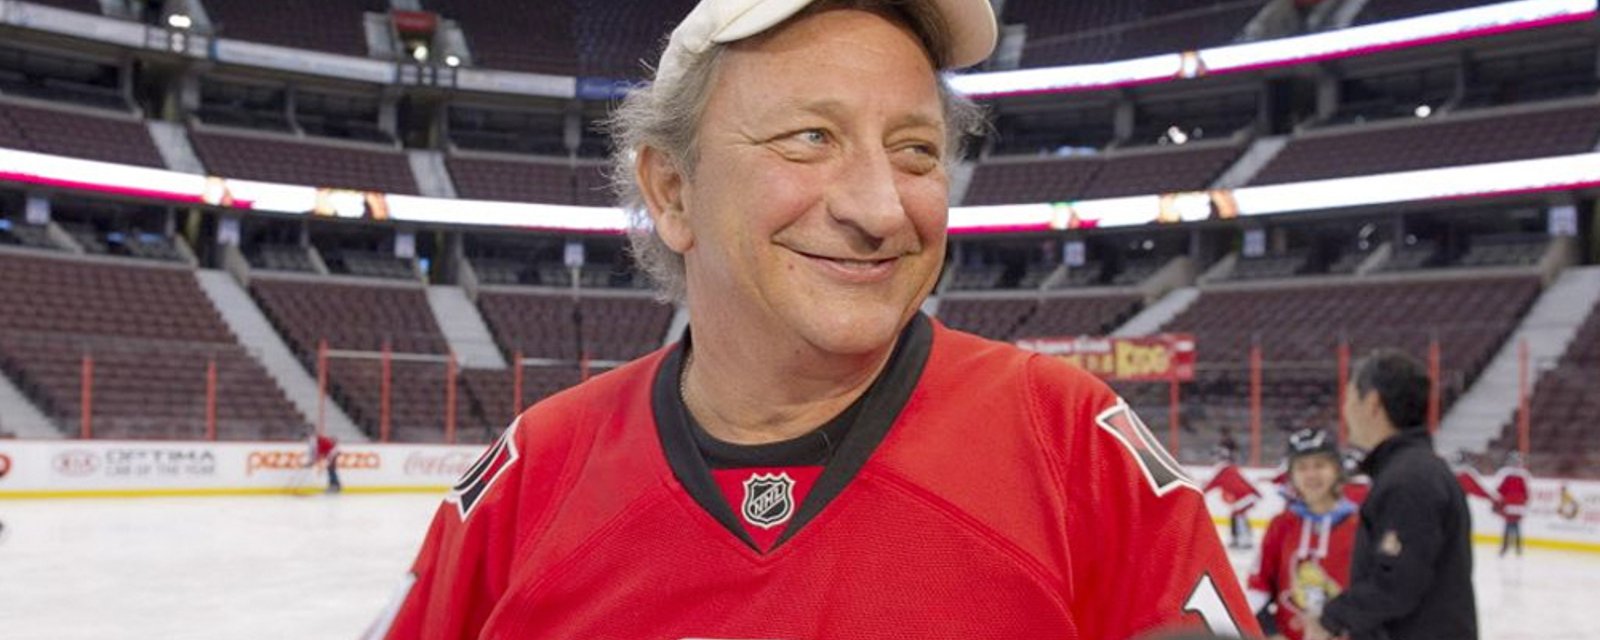 Report: Melnyk donates just $5,000 of $1 million raised by charity